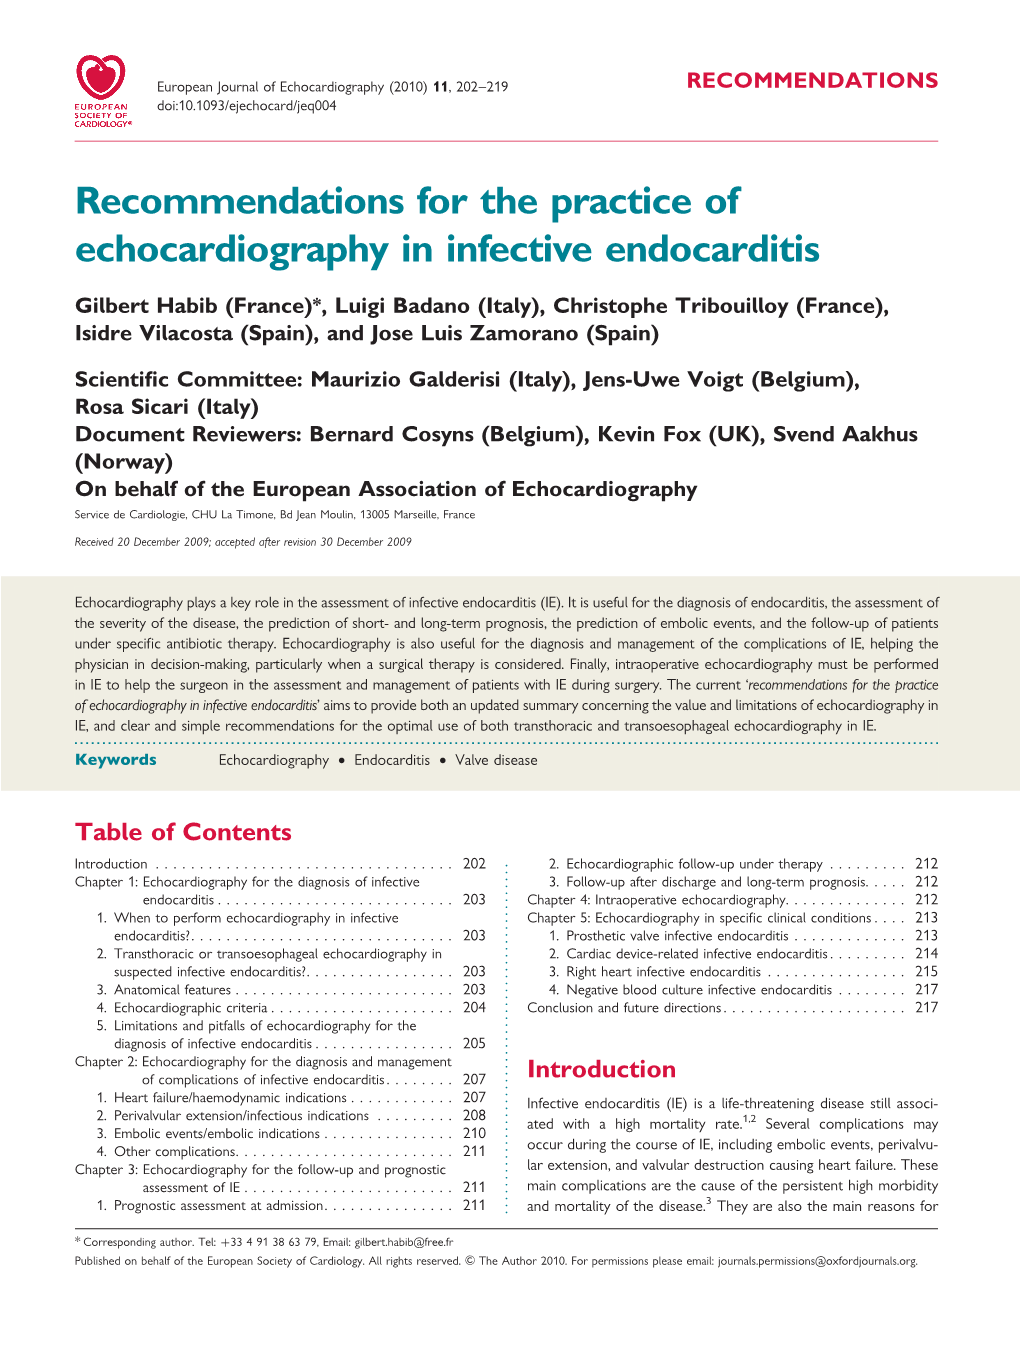 Recommendations for the Practice of Echocardiography in Infective Endocarditis